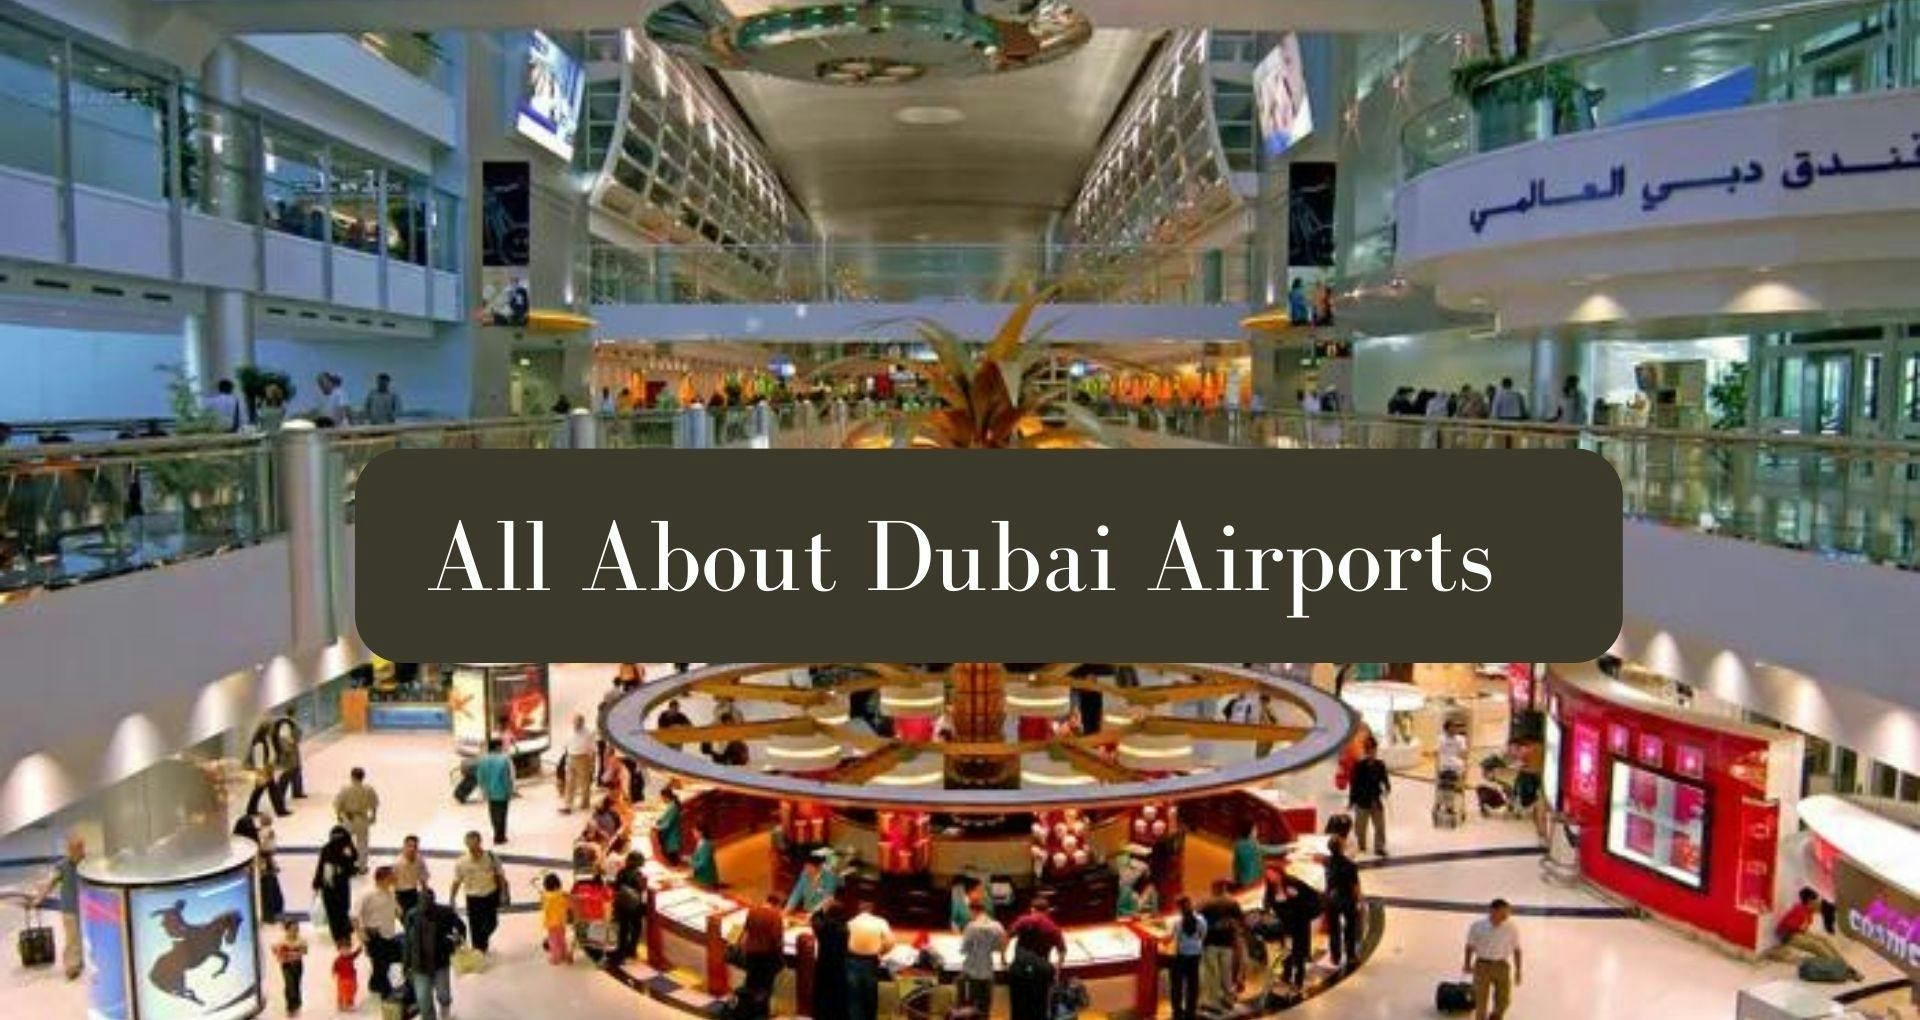 All about Dubai Airports